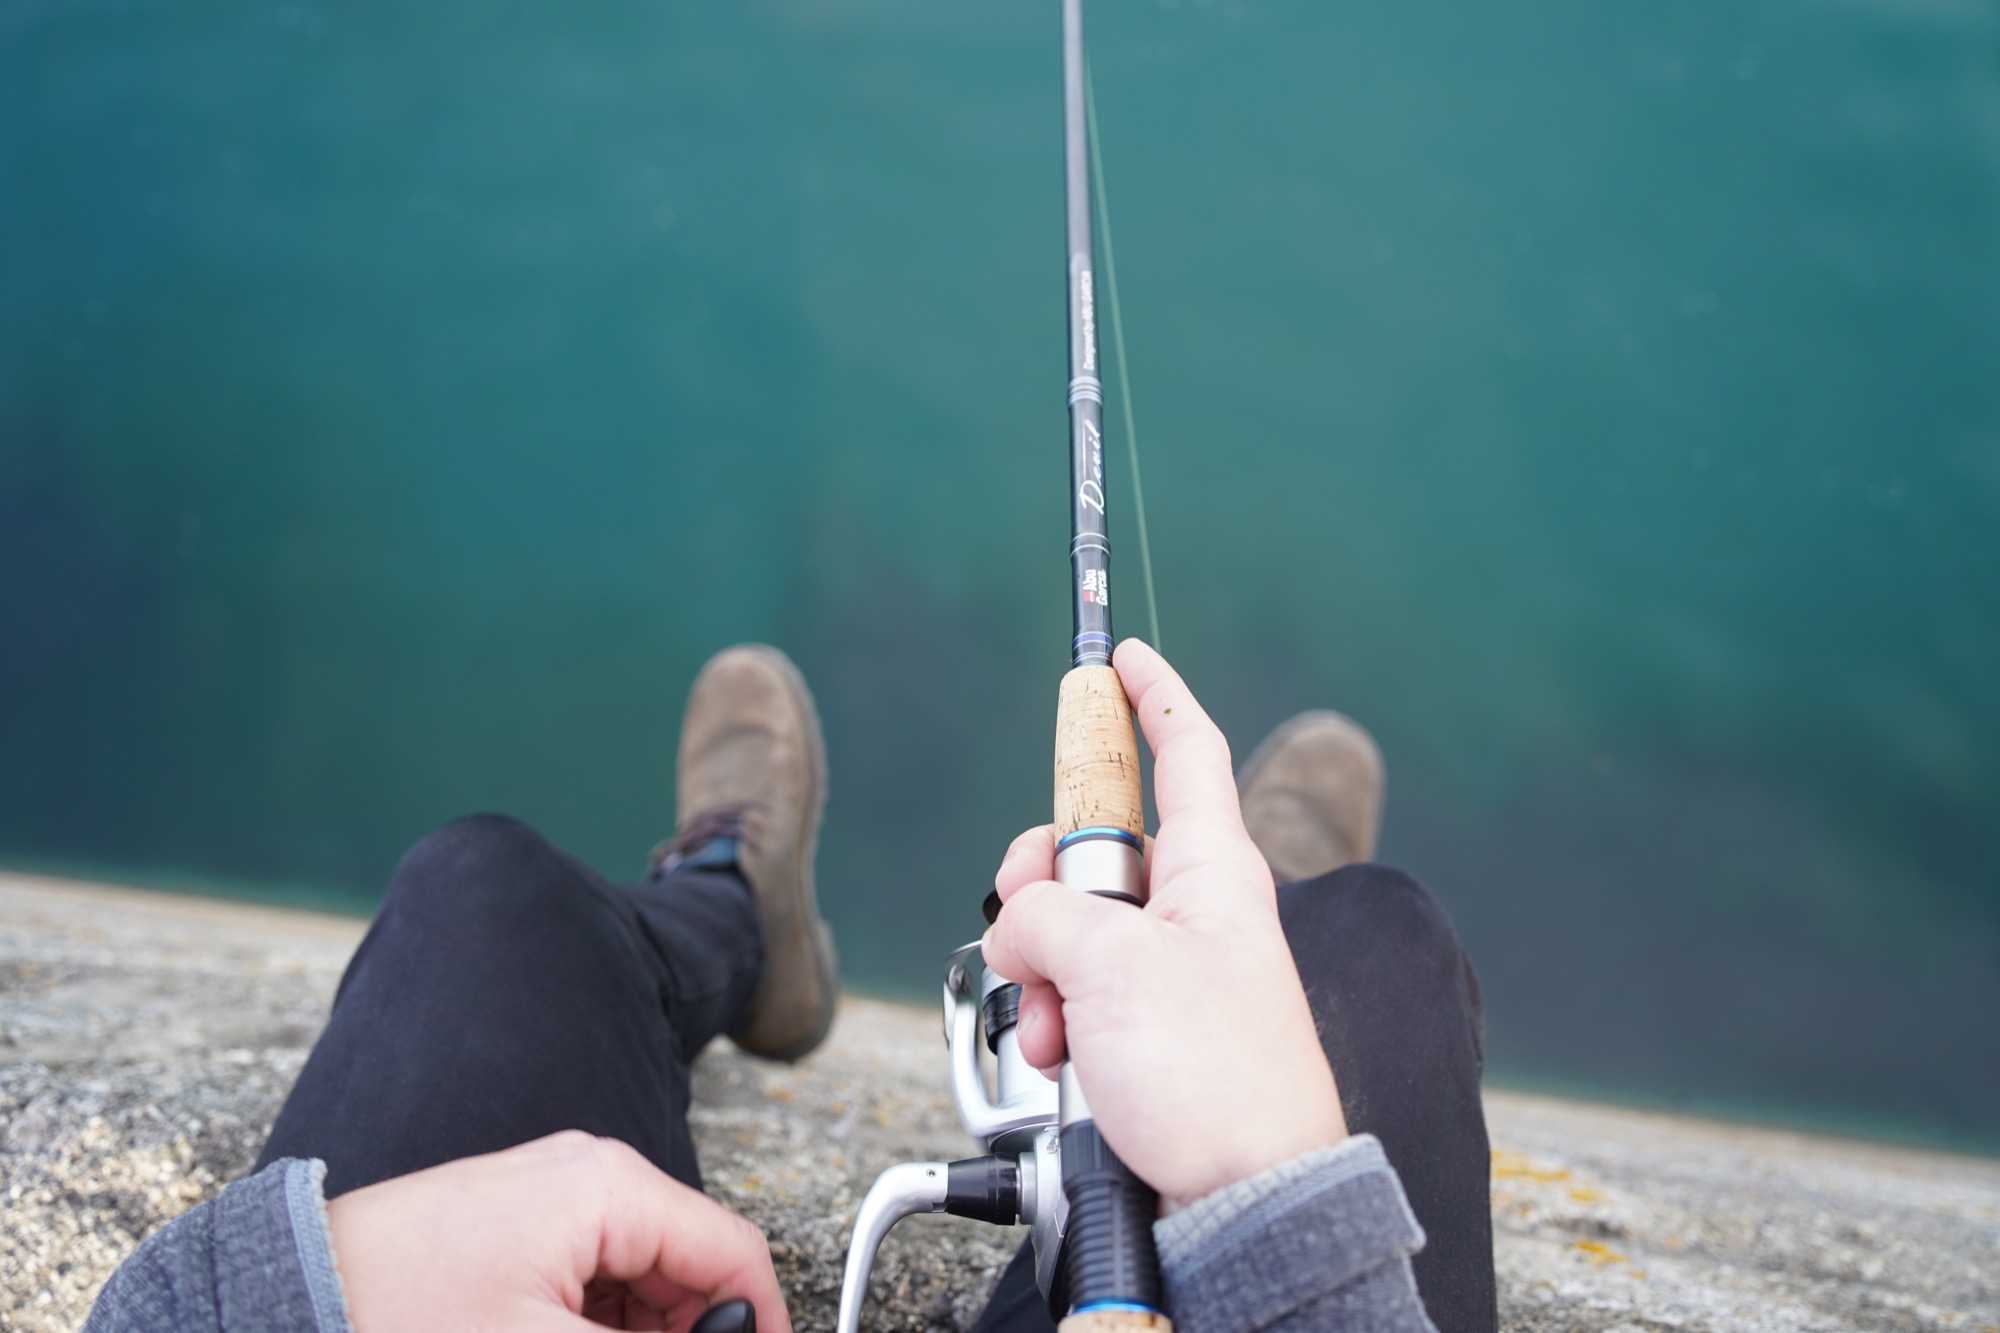 Ice Fishing Rods, Our Top 10 Picks Based on Species and Budget